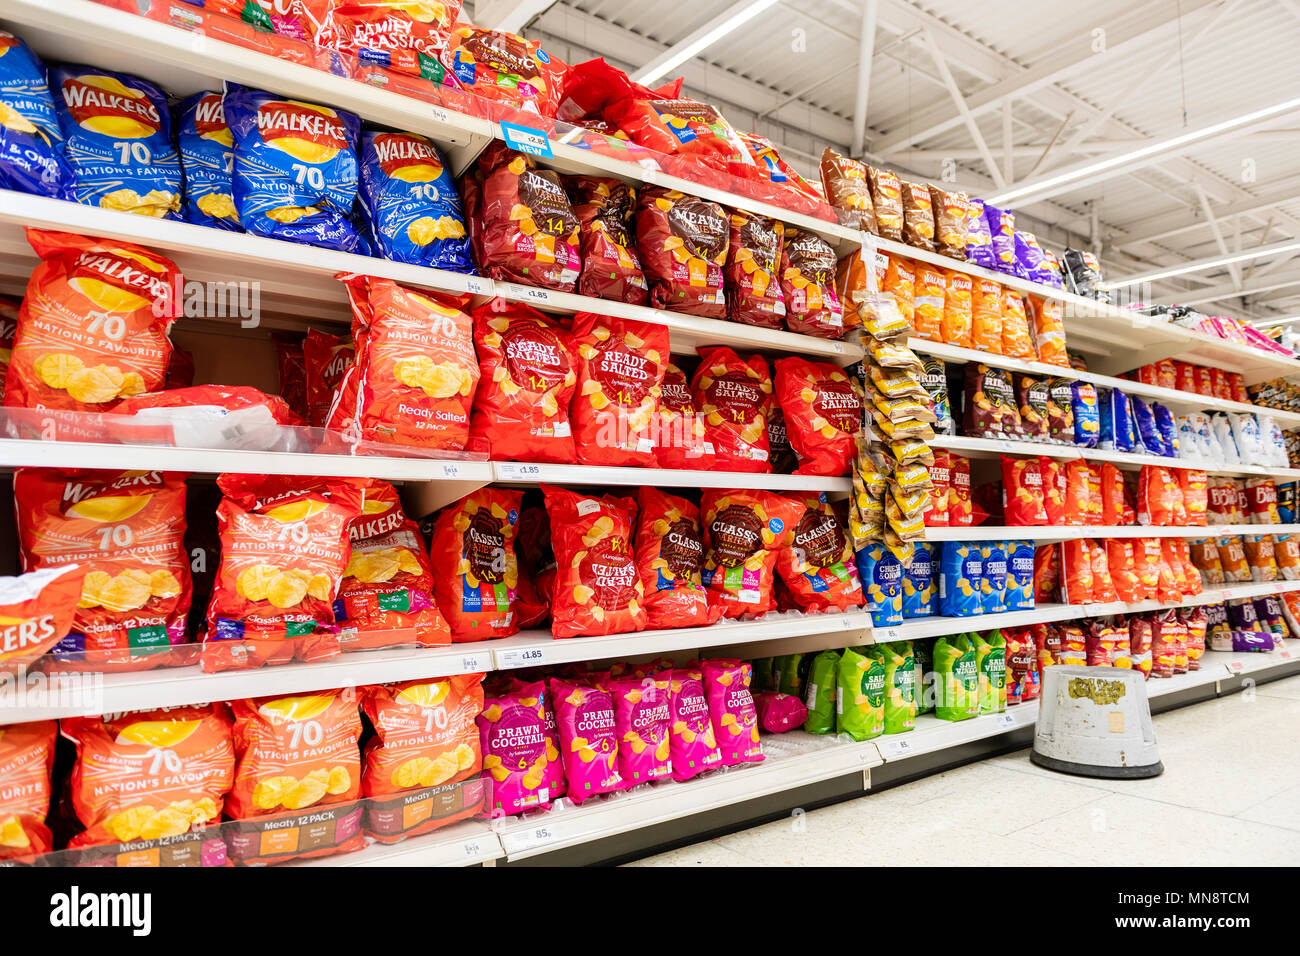 Crisps for sale in a supermarket, UK. Stock Photo